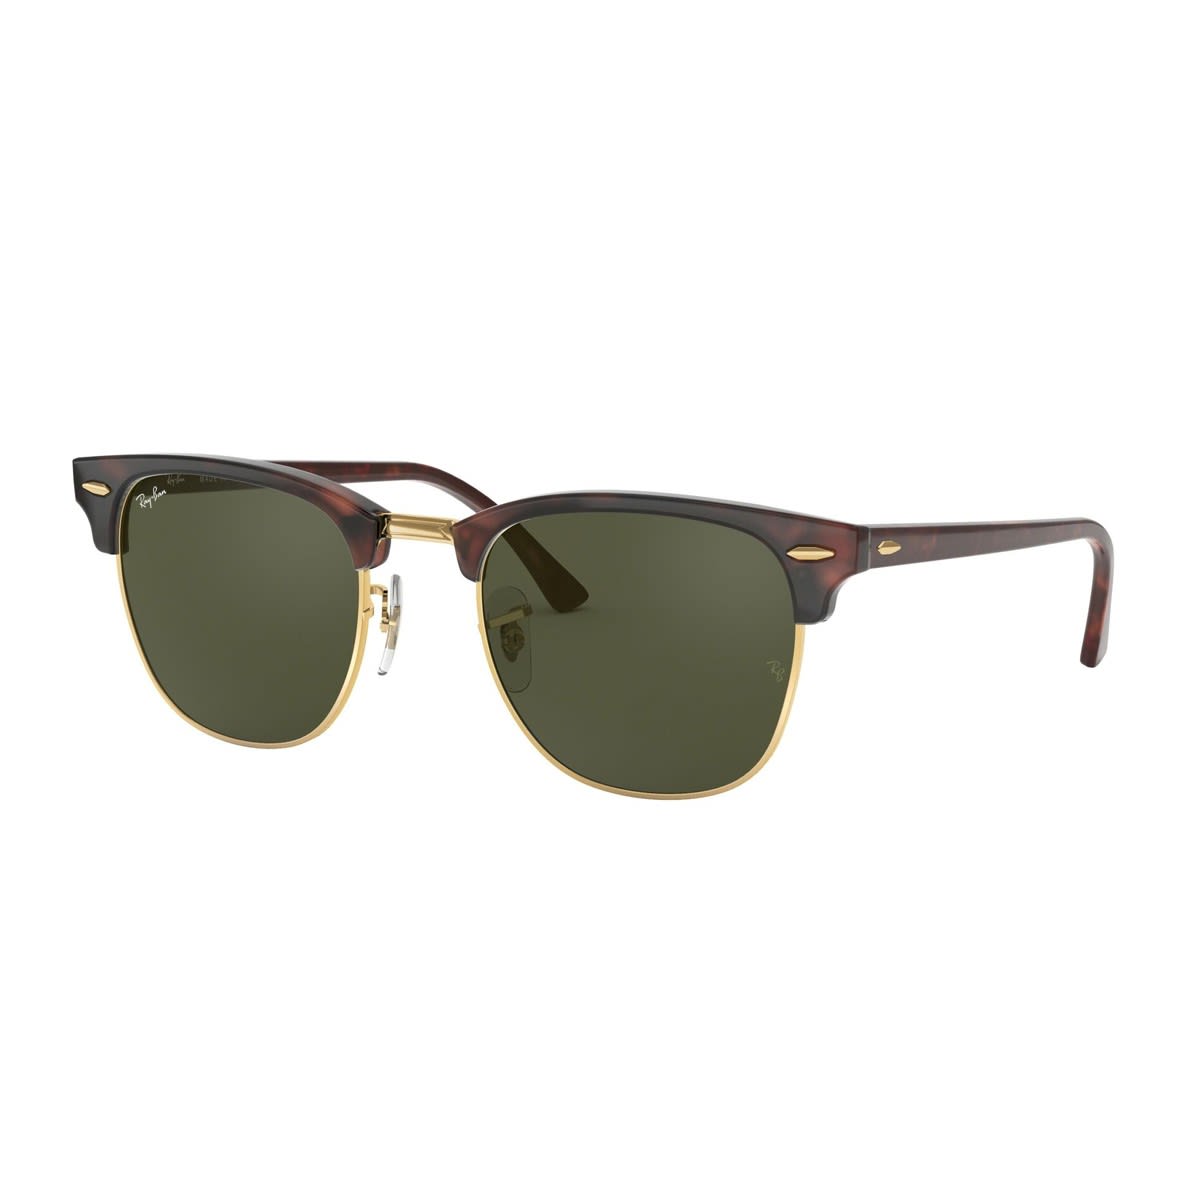 RAY BAN CLUBMASTER RB 3016 SUNGLASSES